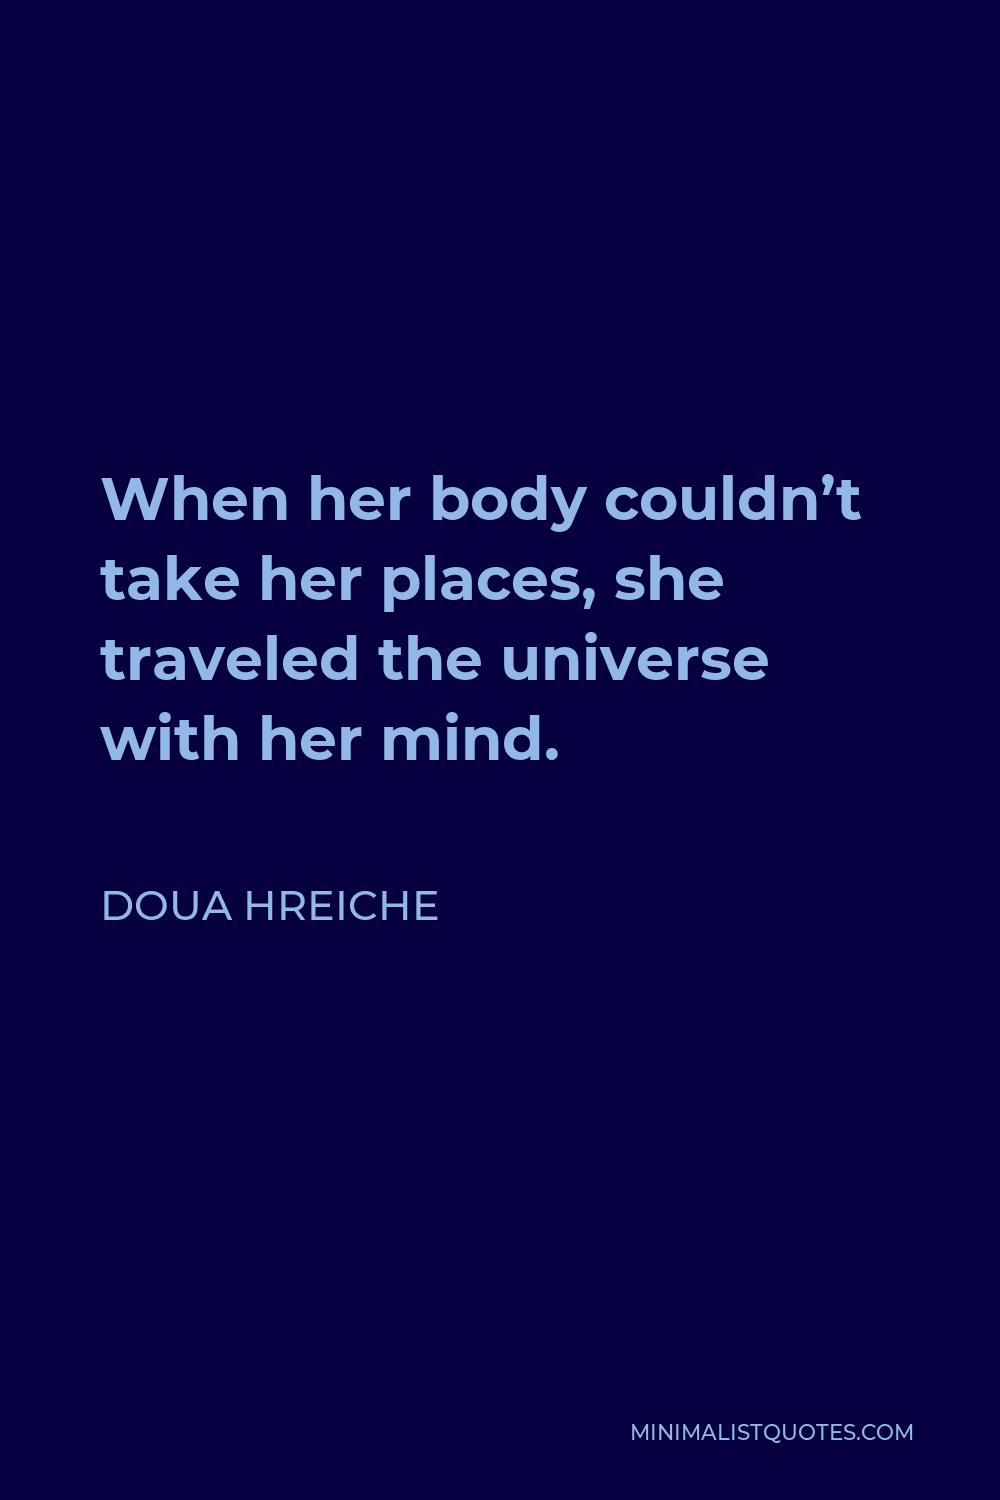 Doua Hreiche Quote - When her body couldn’t take her places, she traveled the universe with her mind.